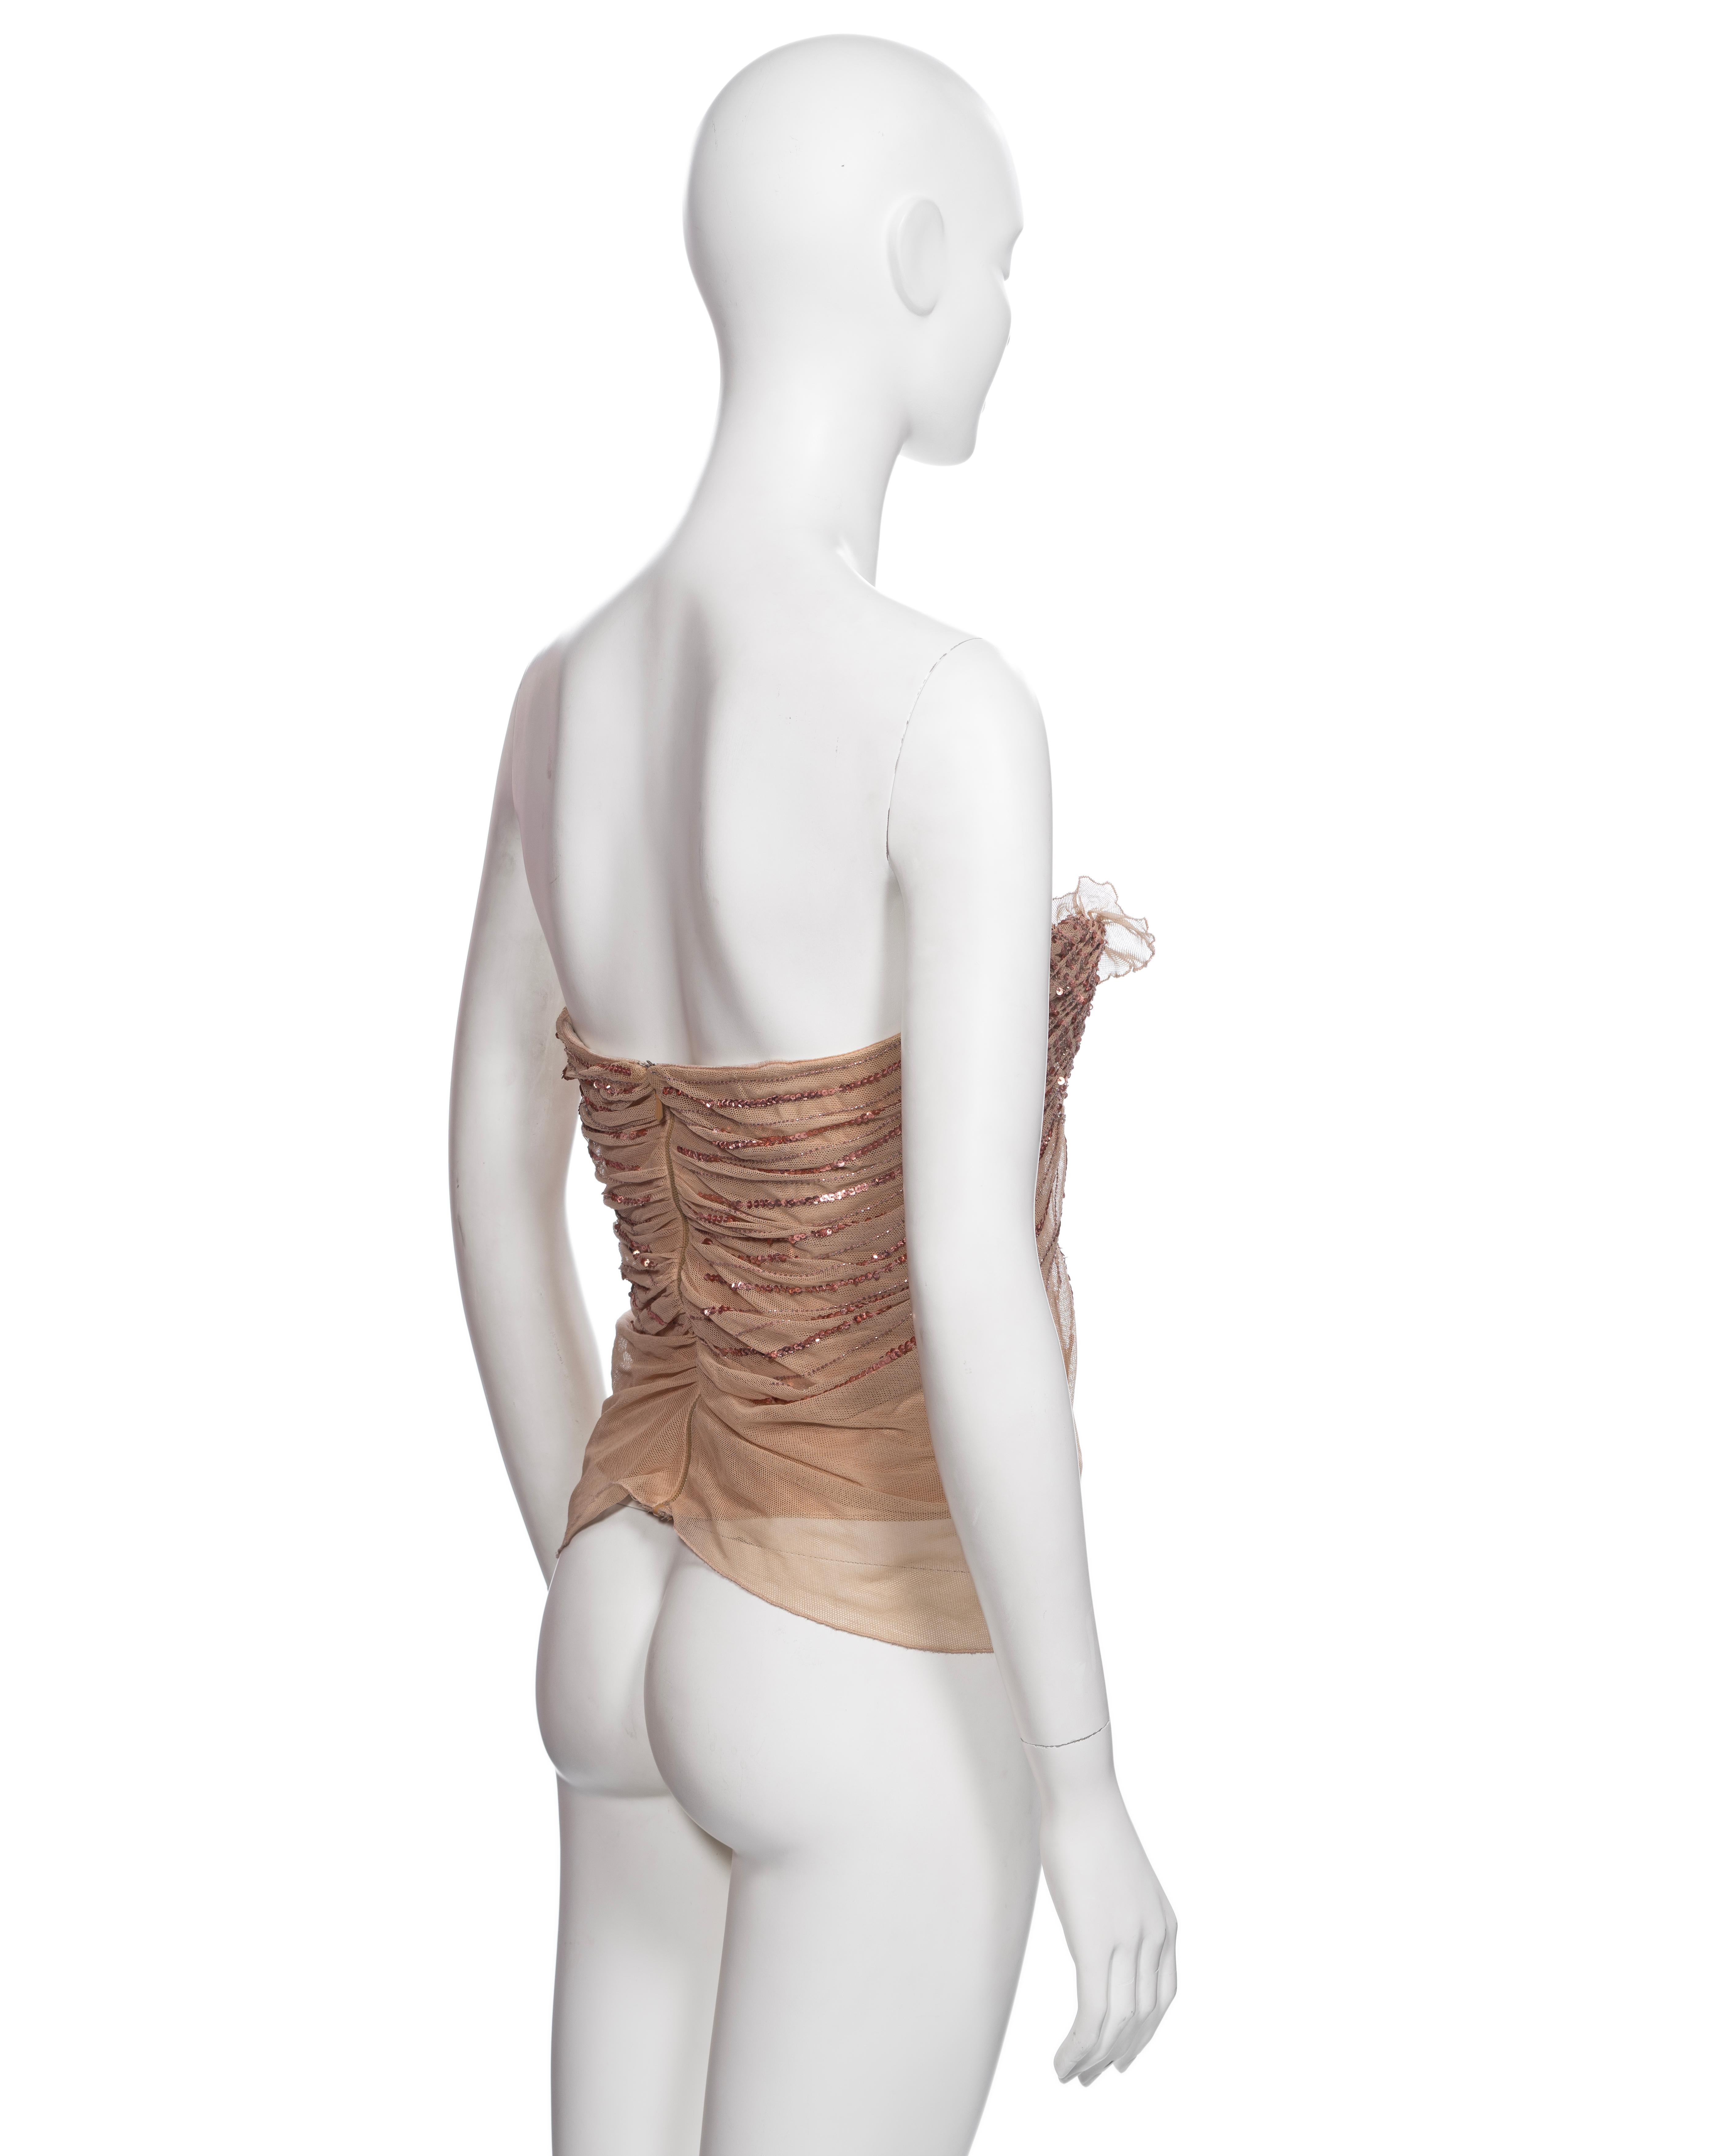 Christian Dior by John Galliano Nude Smocked Mesh and Sequin Corset Top, FW 2005 For Sale 7